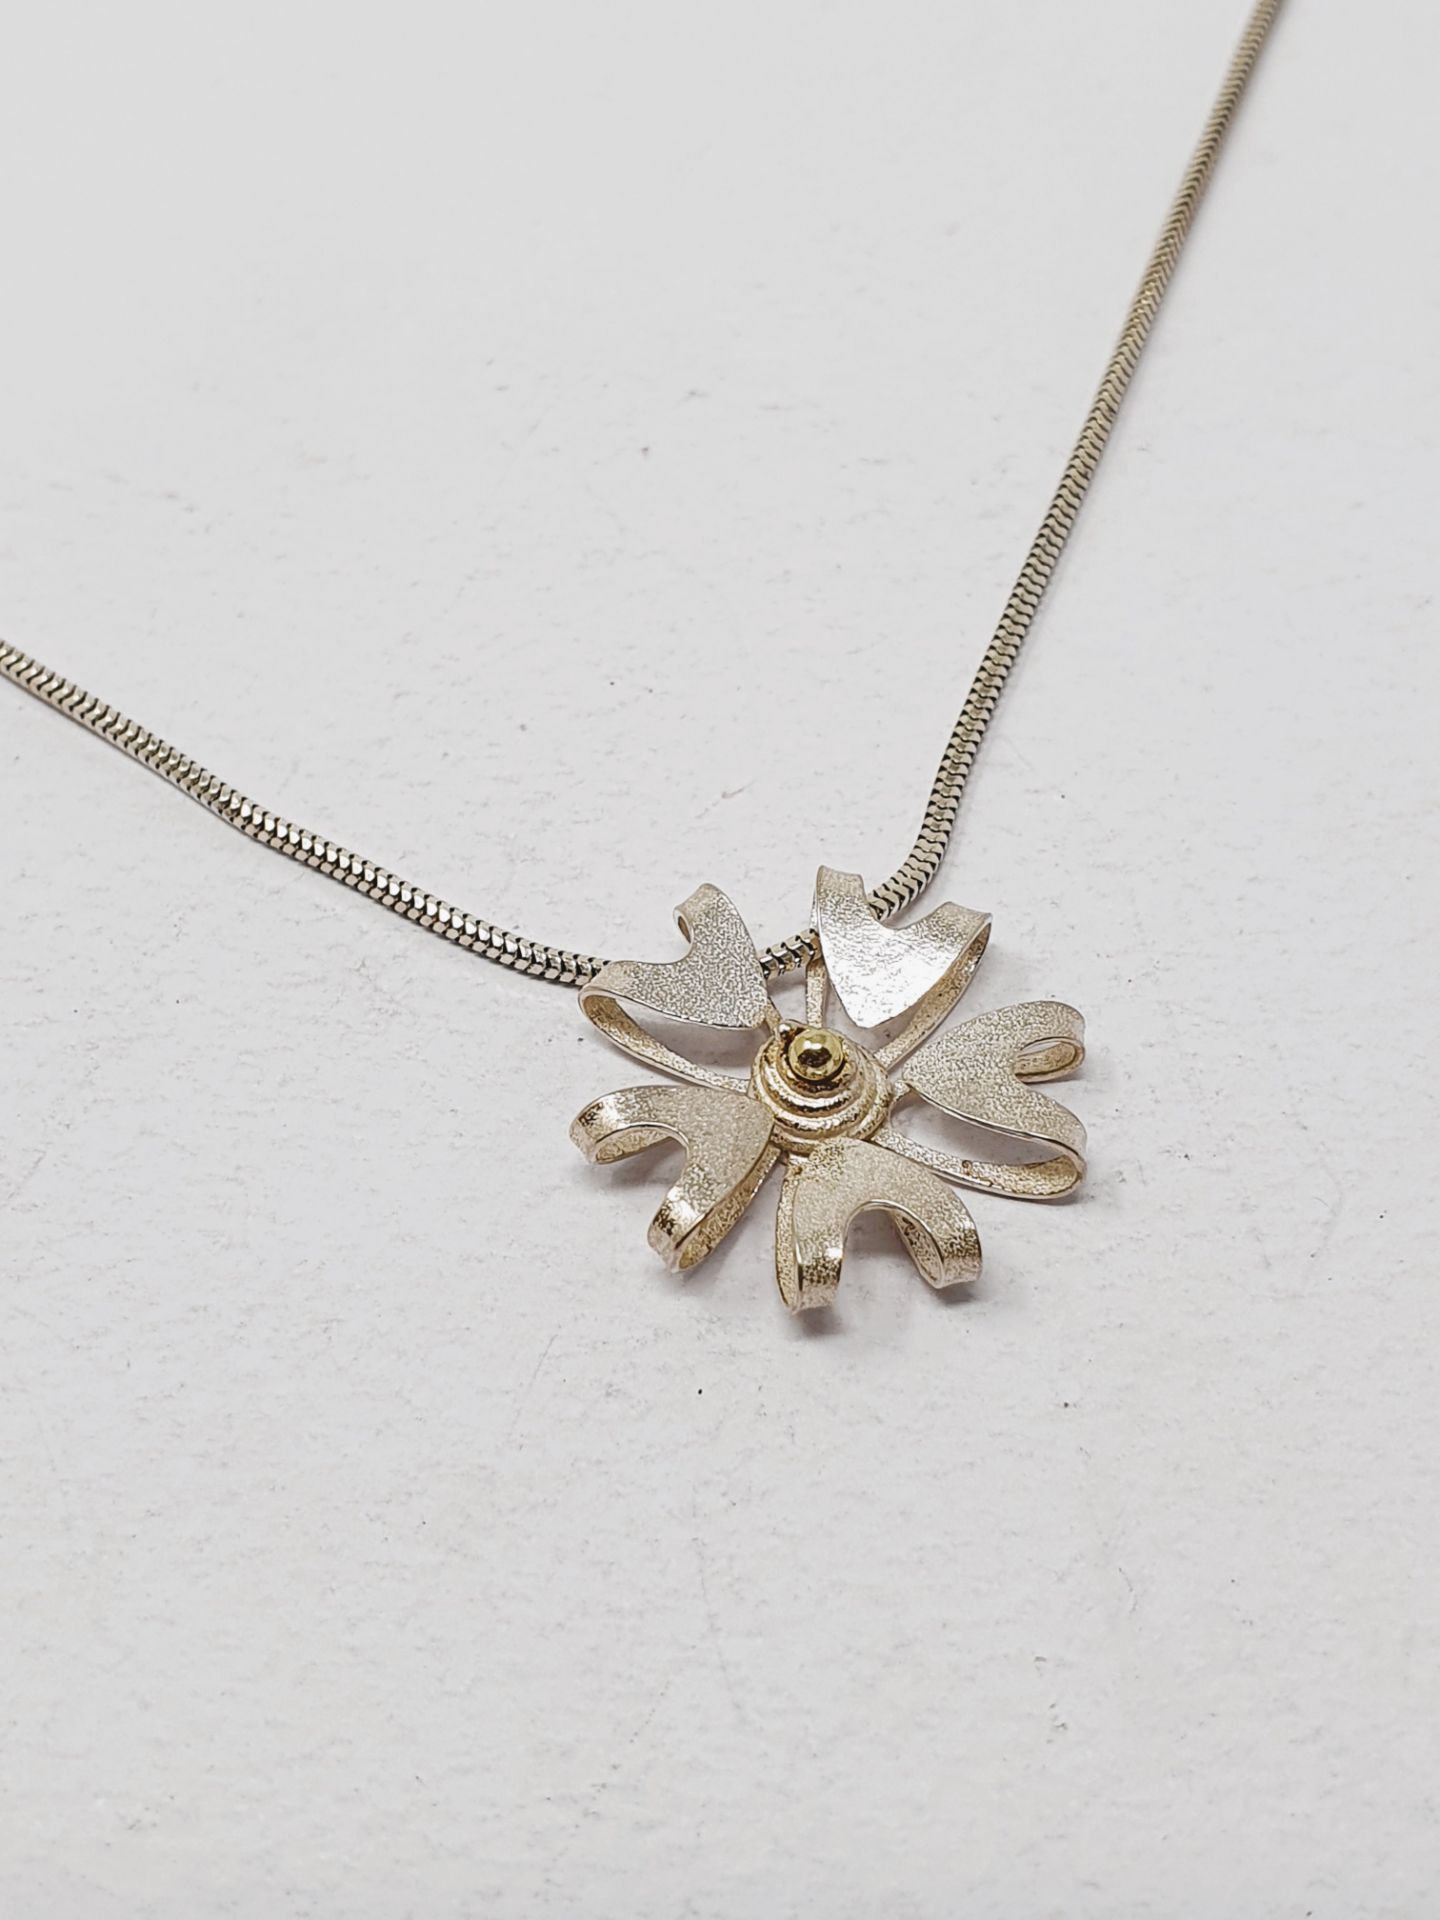 Sian Elizabeth Hughes, handmade sterling silver 'Foliage' necklace and two 'Bloom' pendants, - Image 3 of 5